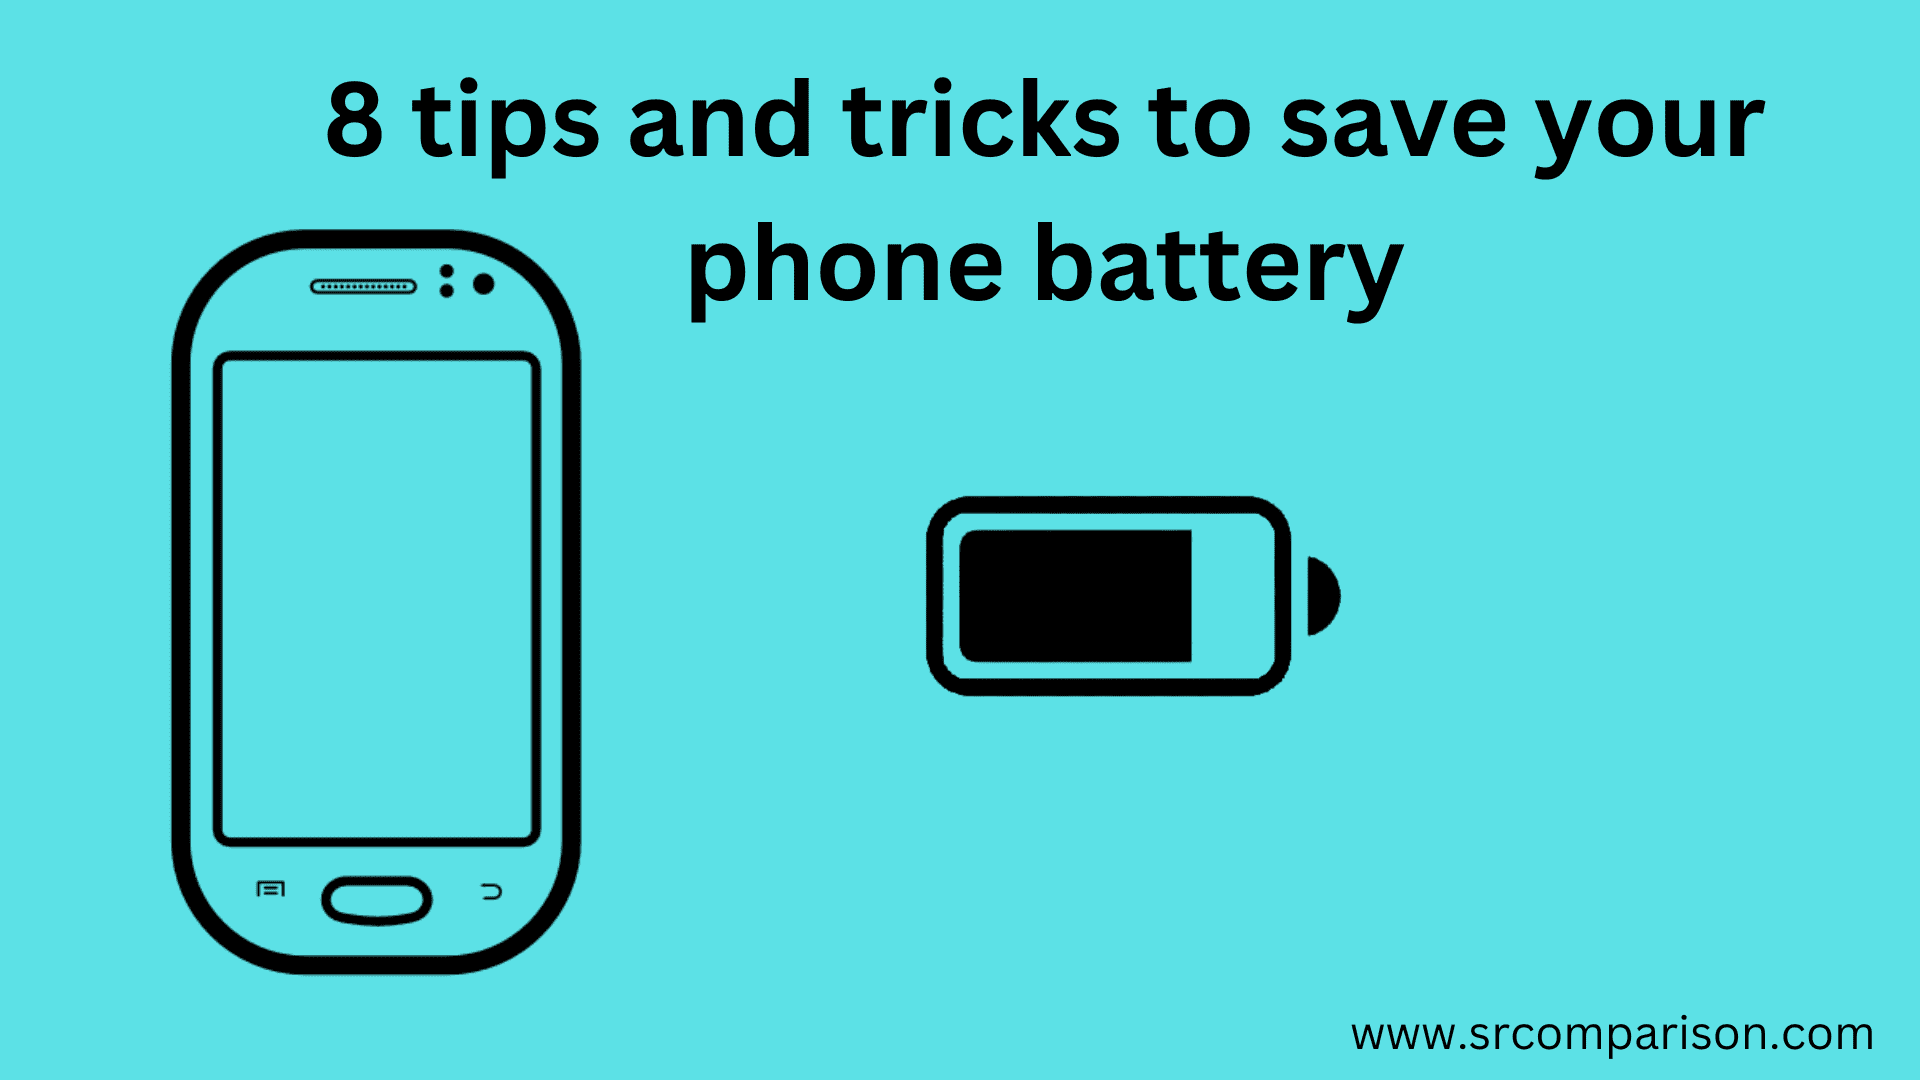 8 tips and tricks to save your phone battery